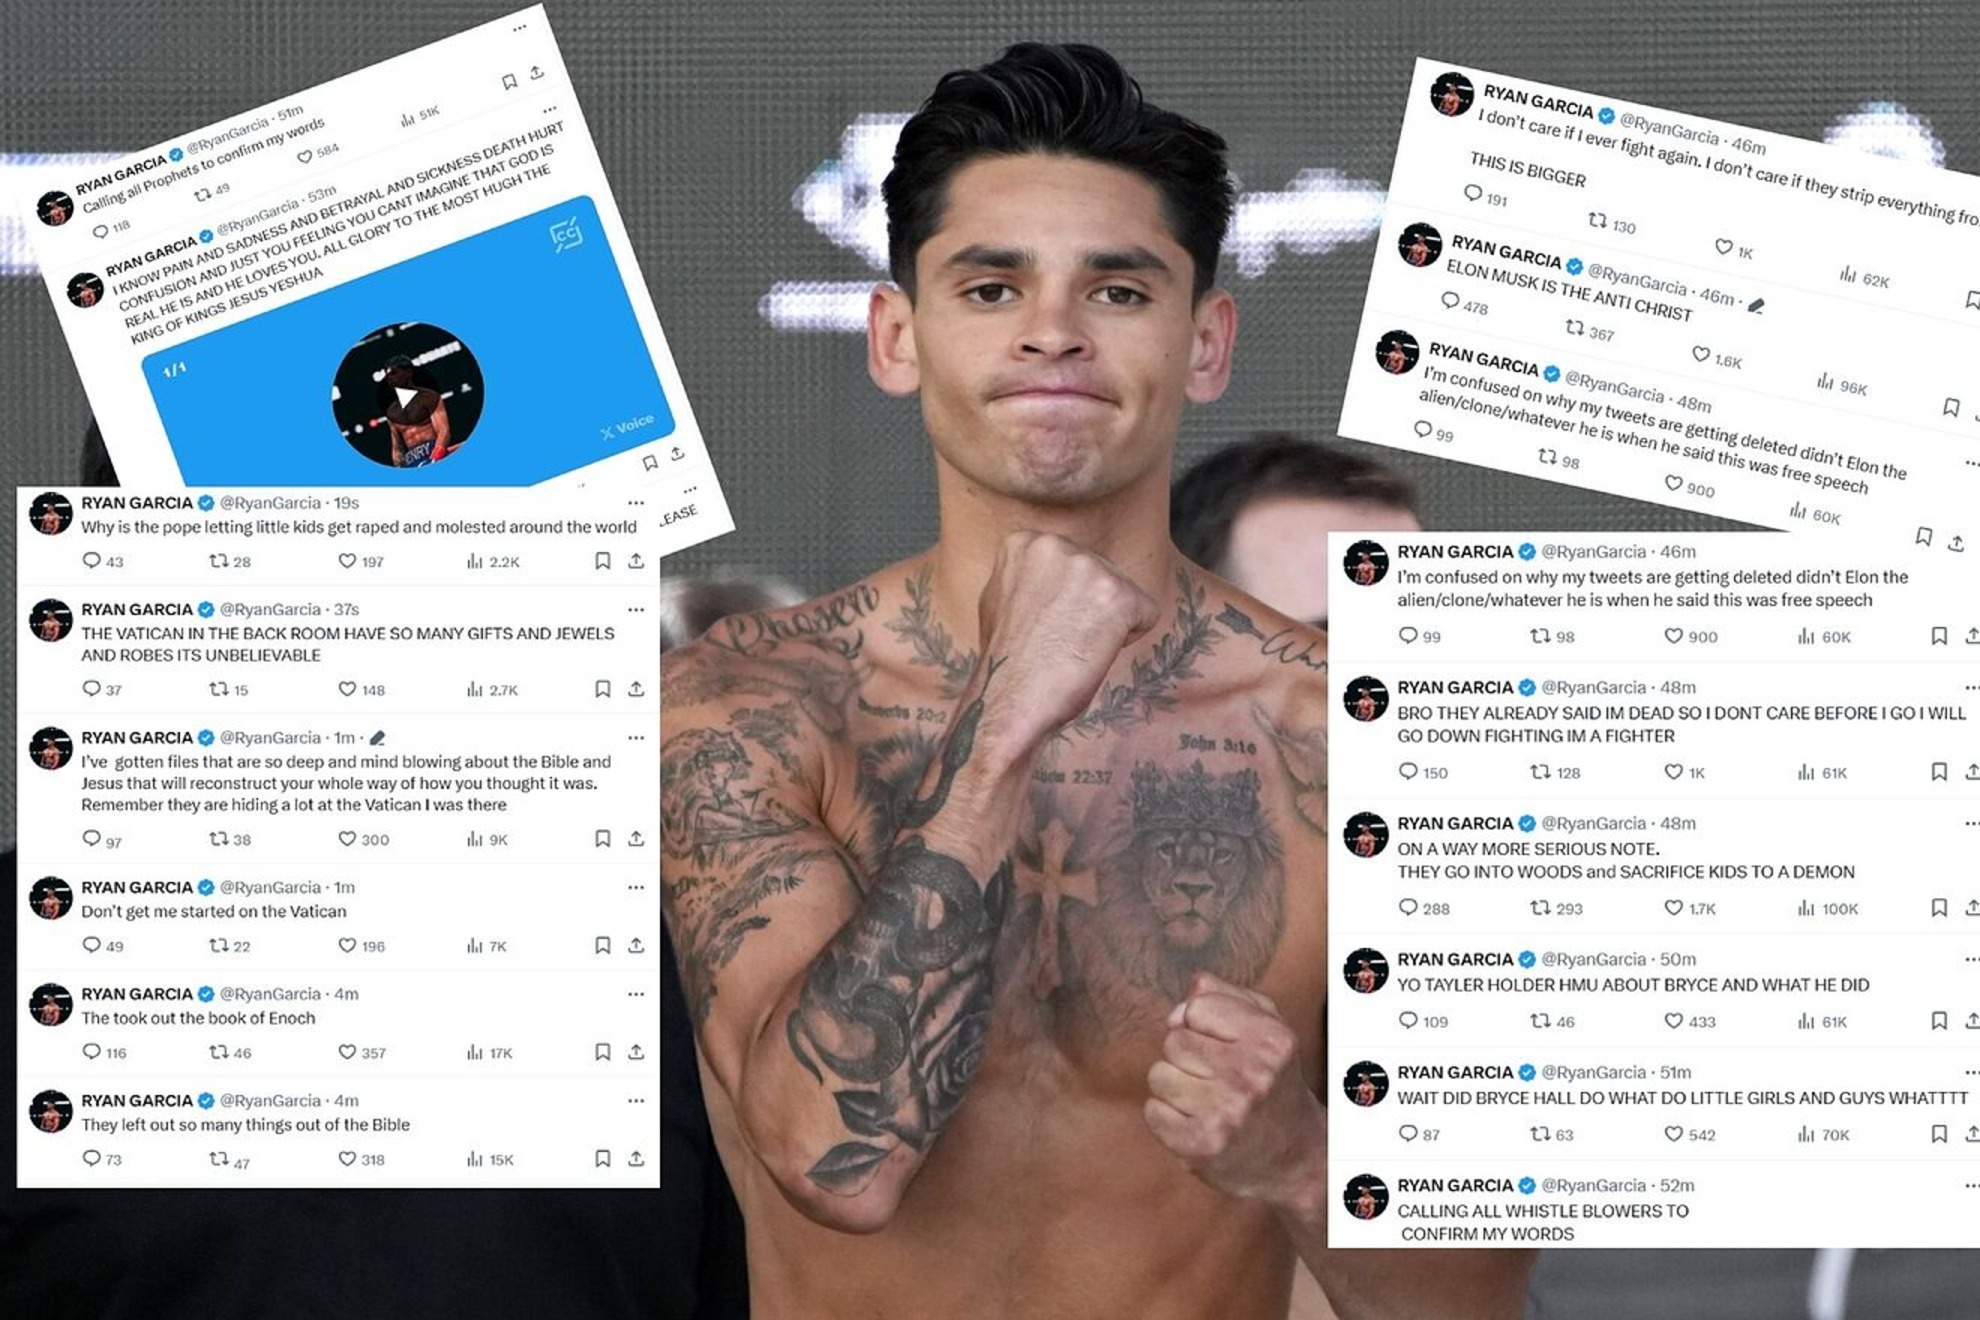 Ryan Garcia continues with his cryptic messages on social media.